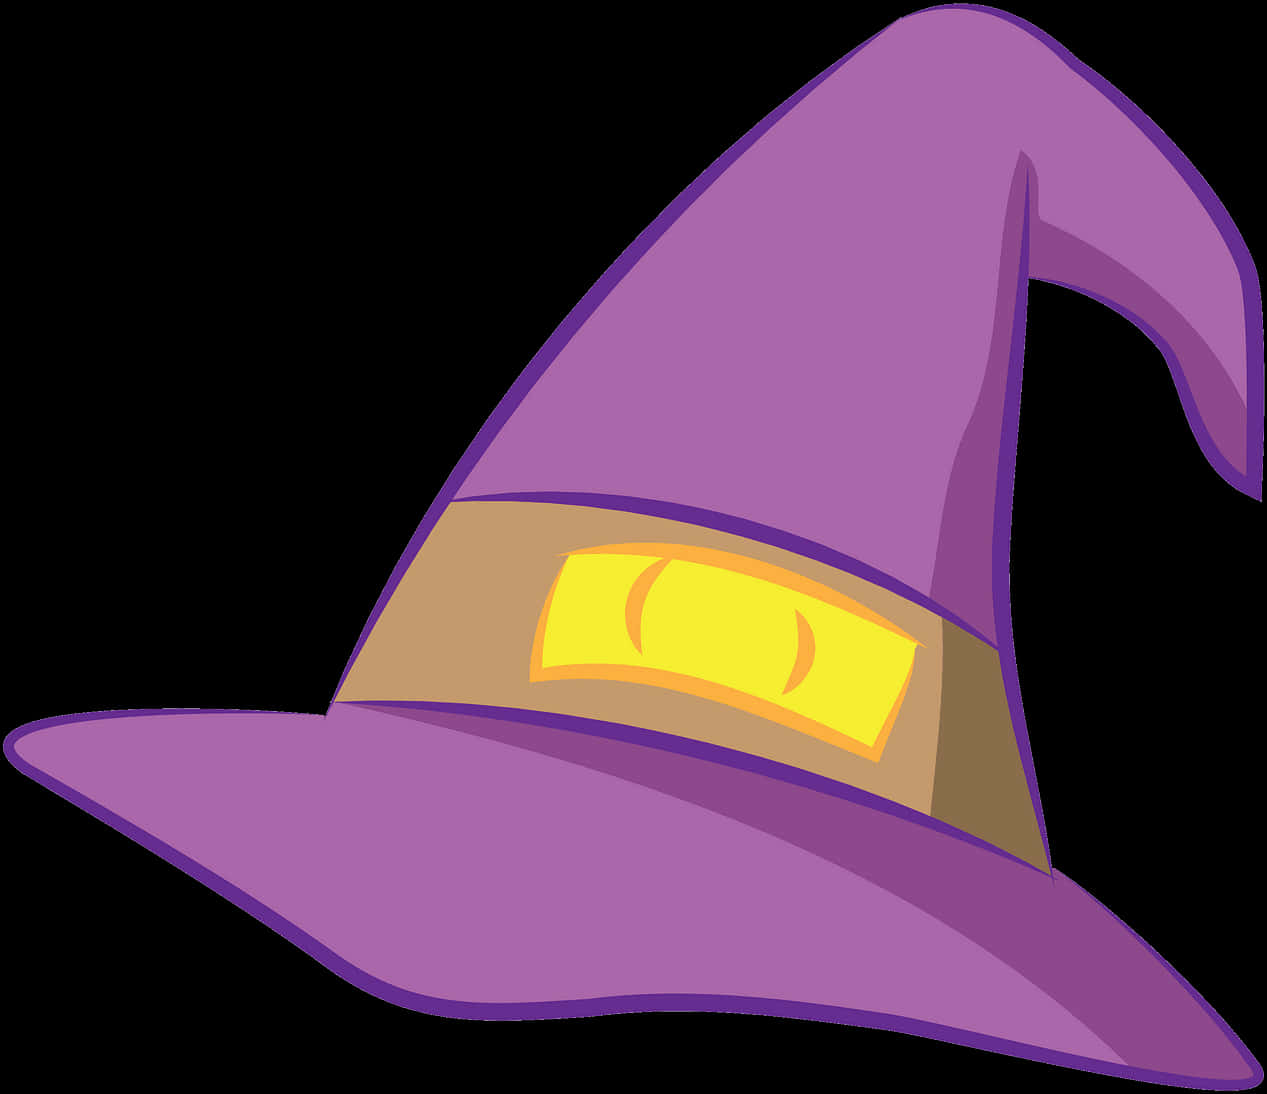 Purple Witch Hat Cartoon PNG image